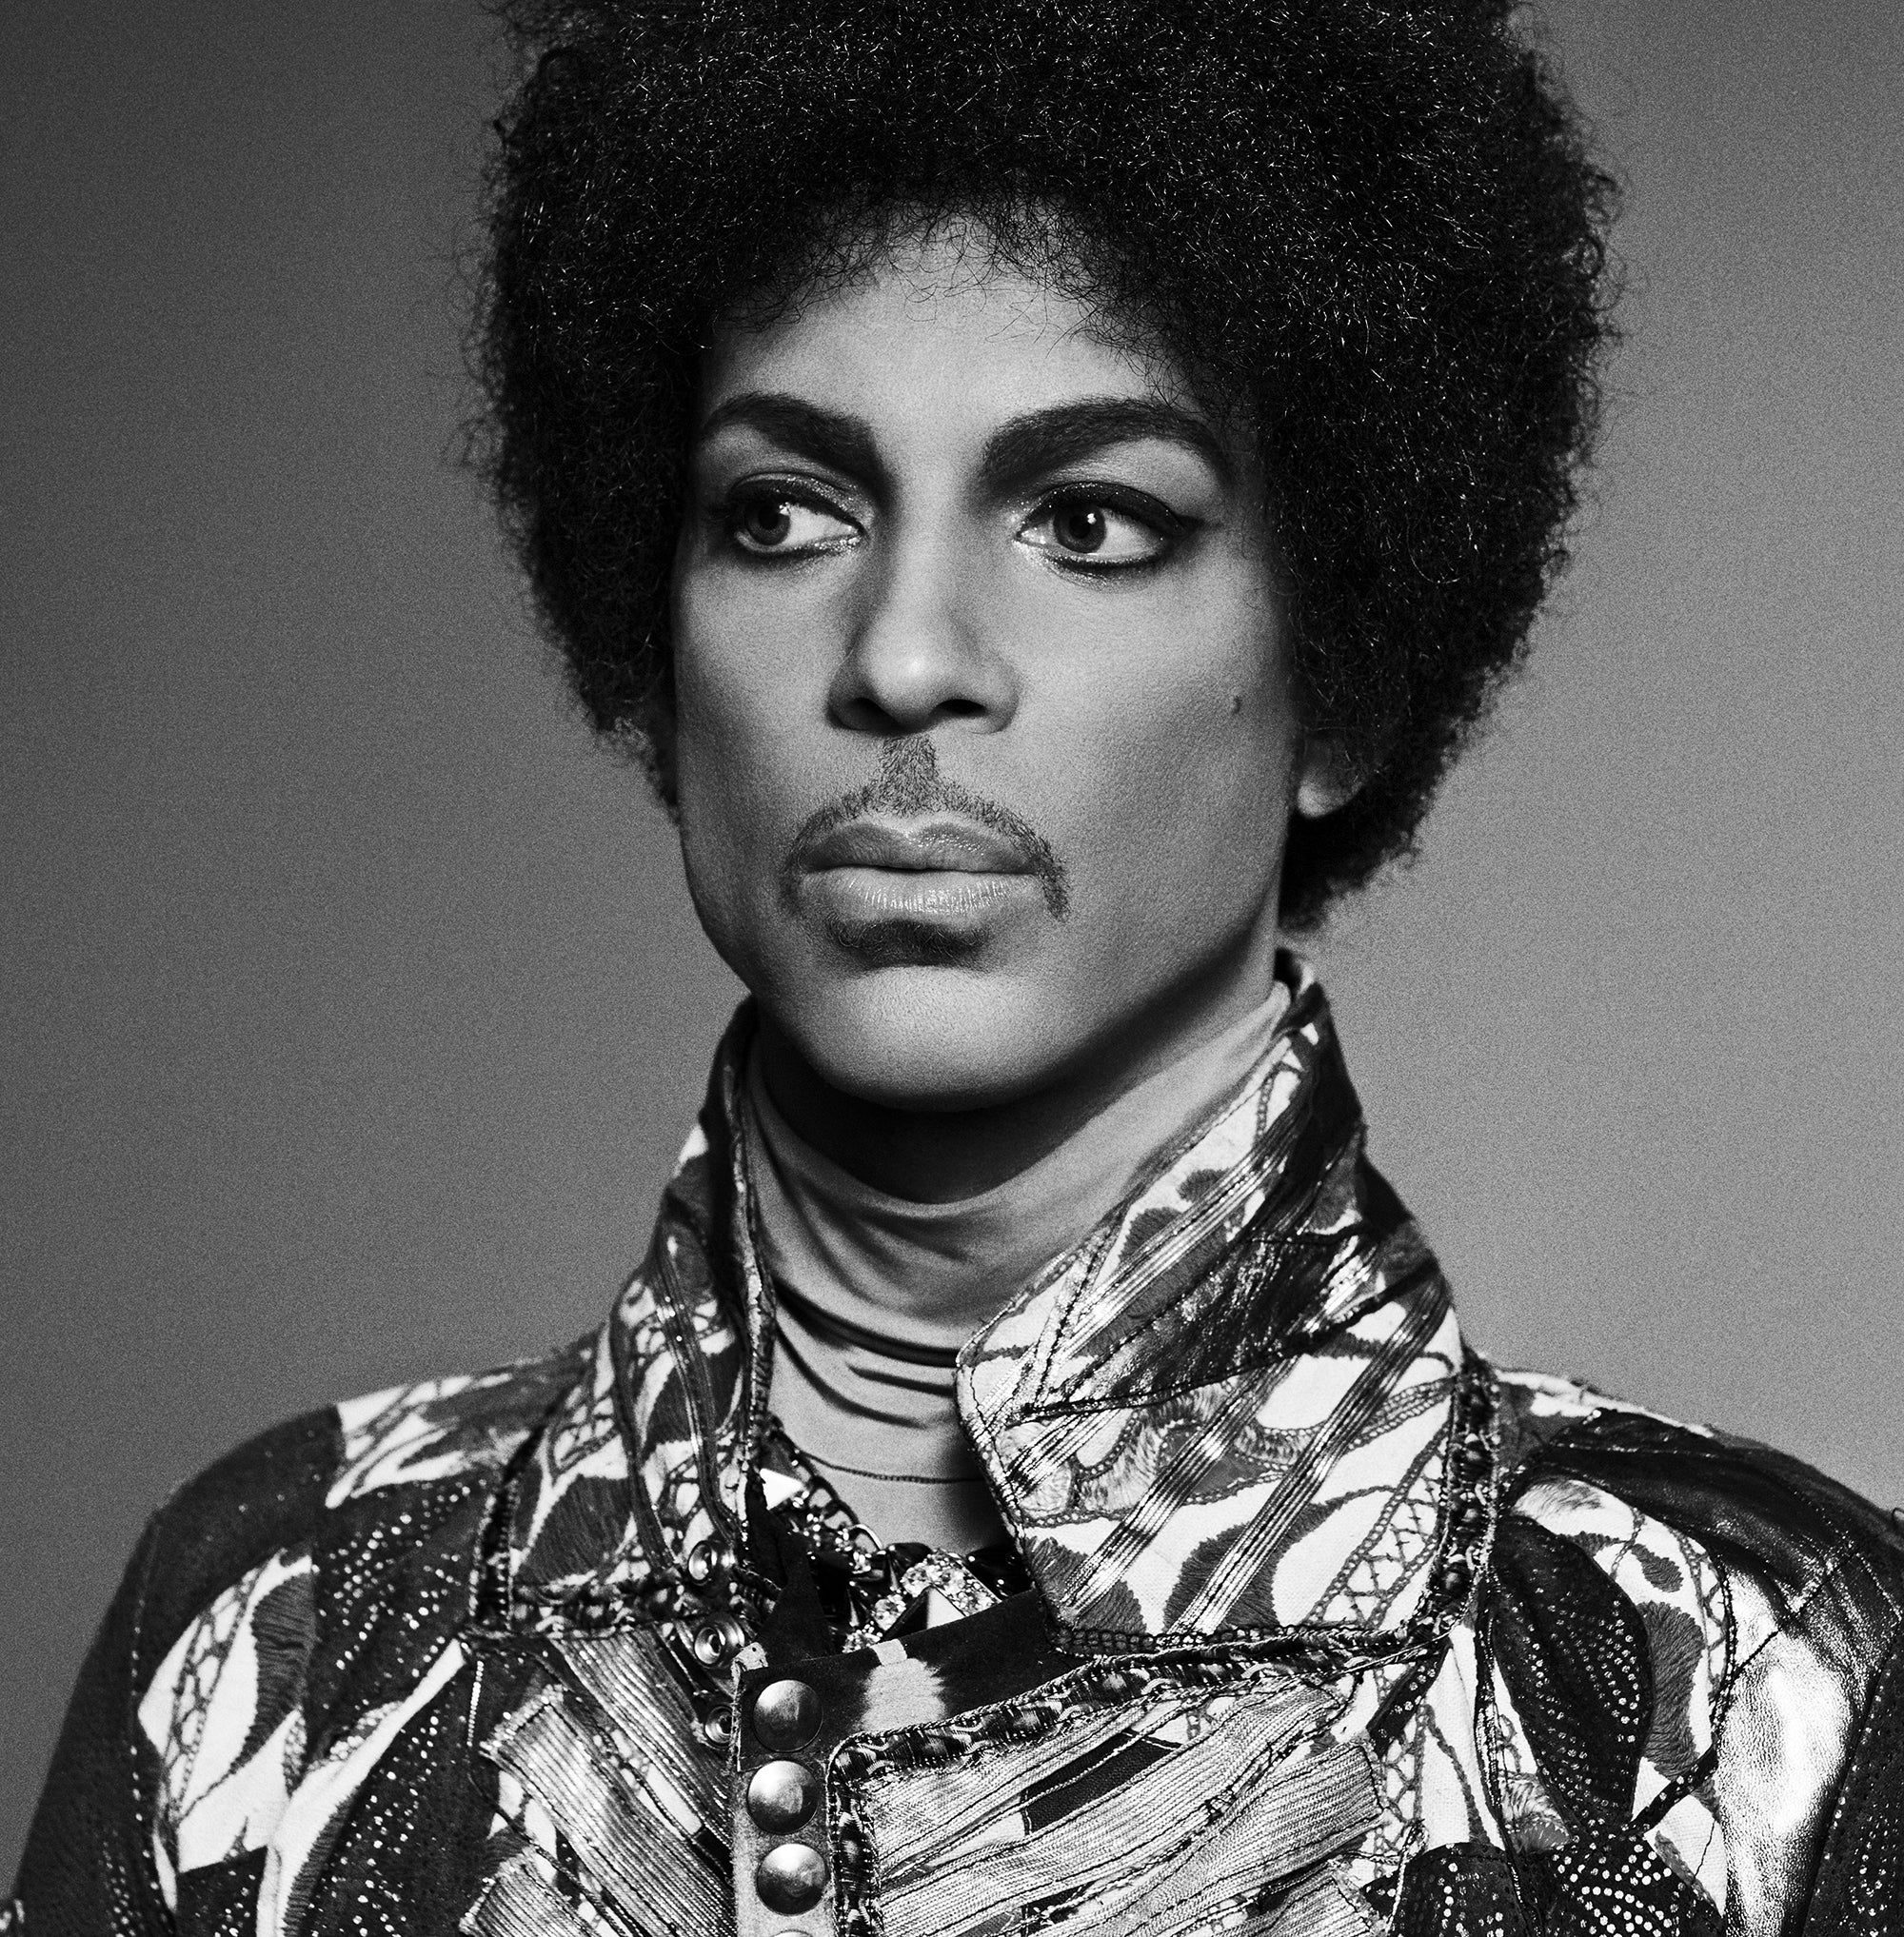 Prince to Release Two New Albums in September